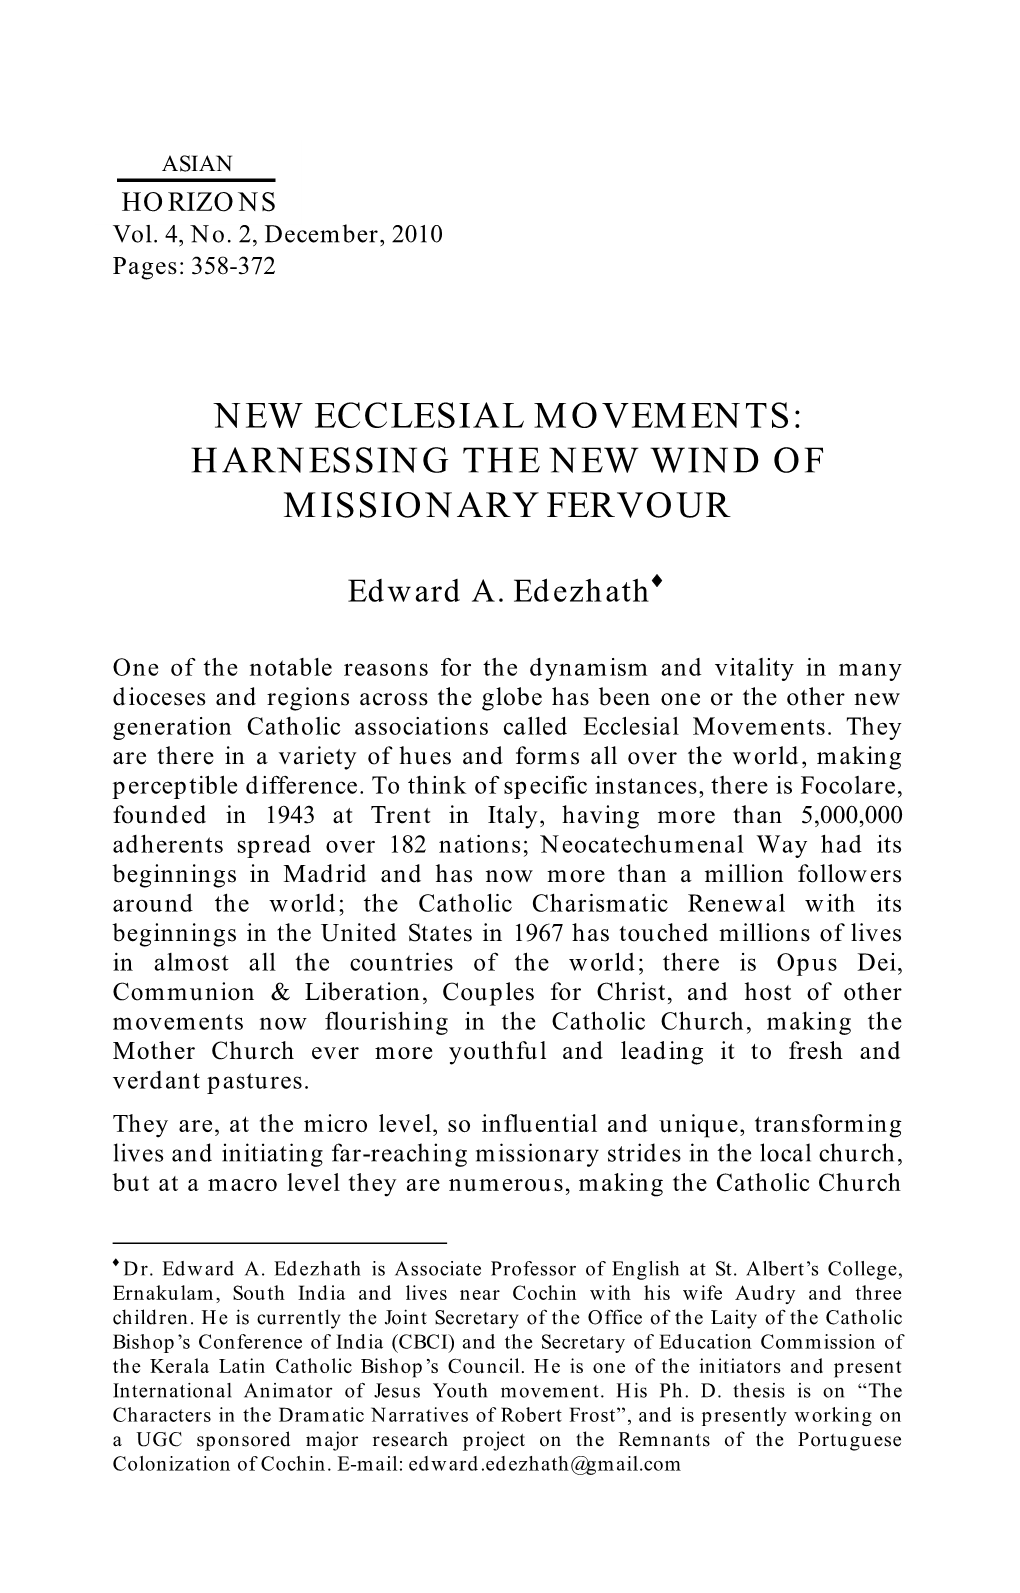 New Ecclesial Movements: Harnessing the New Wind of Missionary Fervour